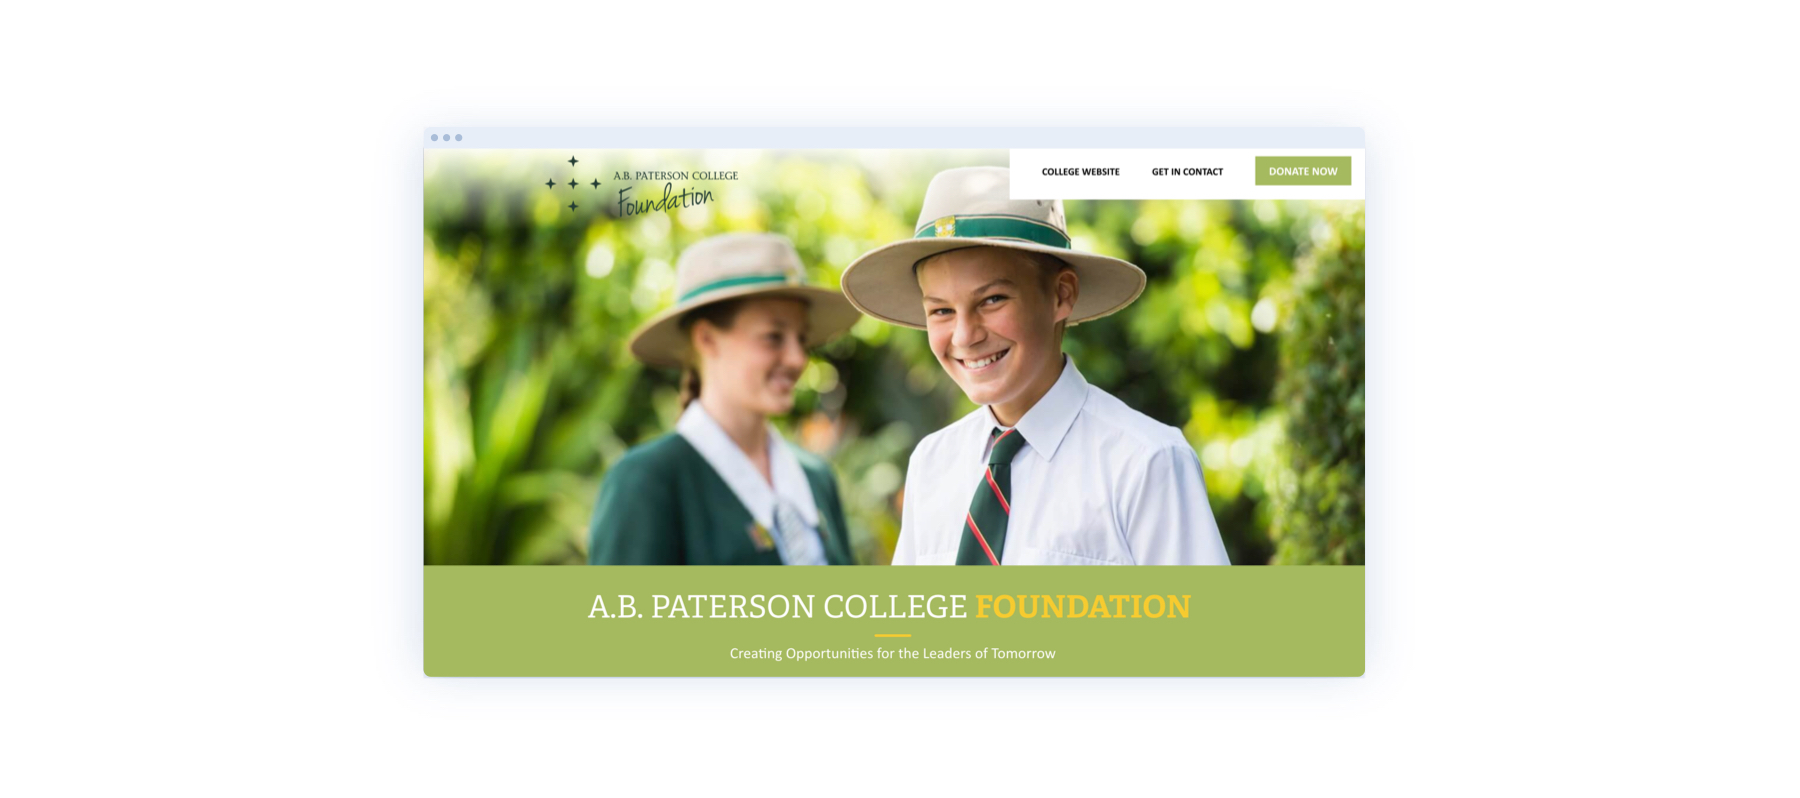 Image of AB Paterson College Foundation